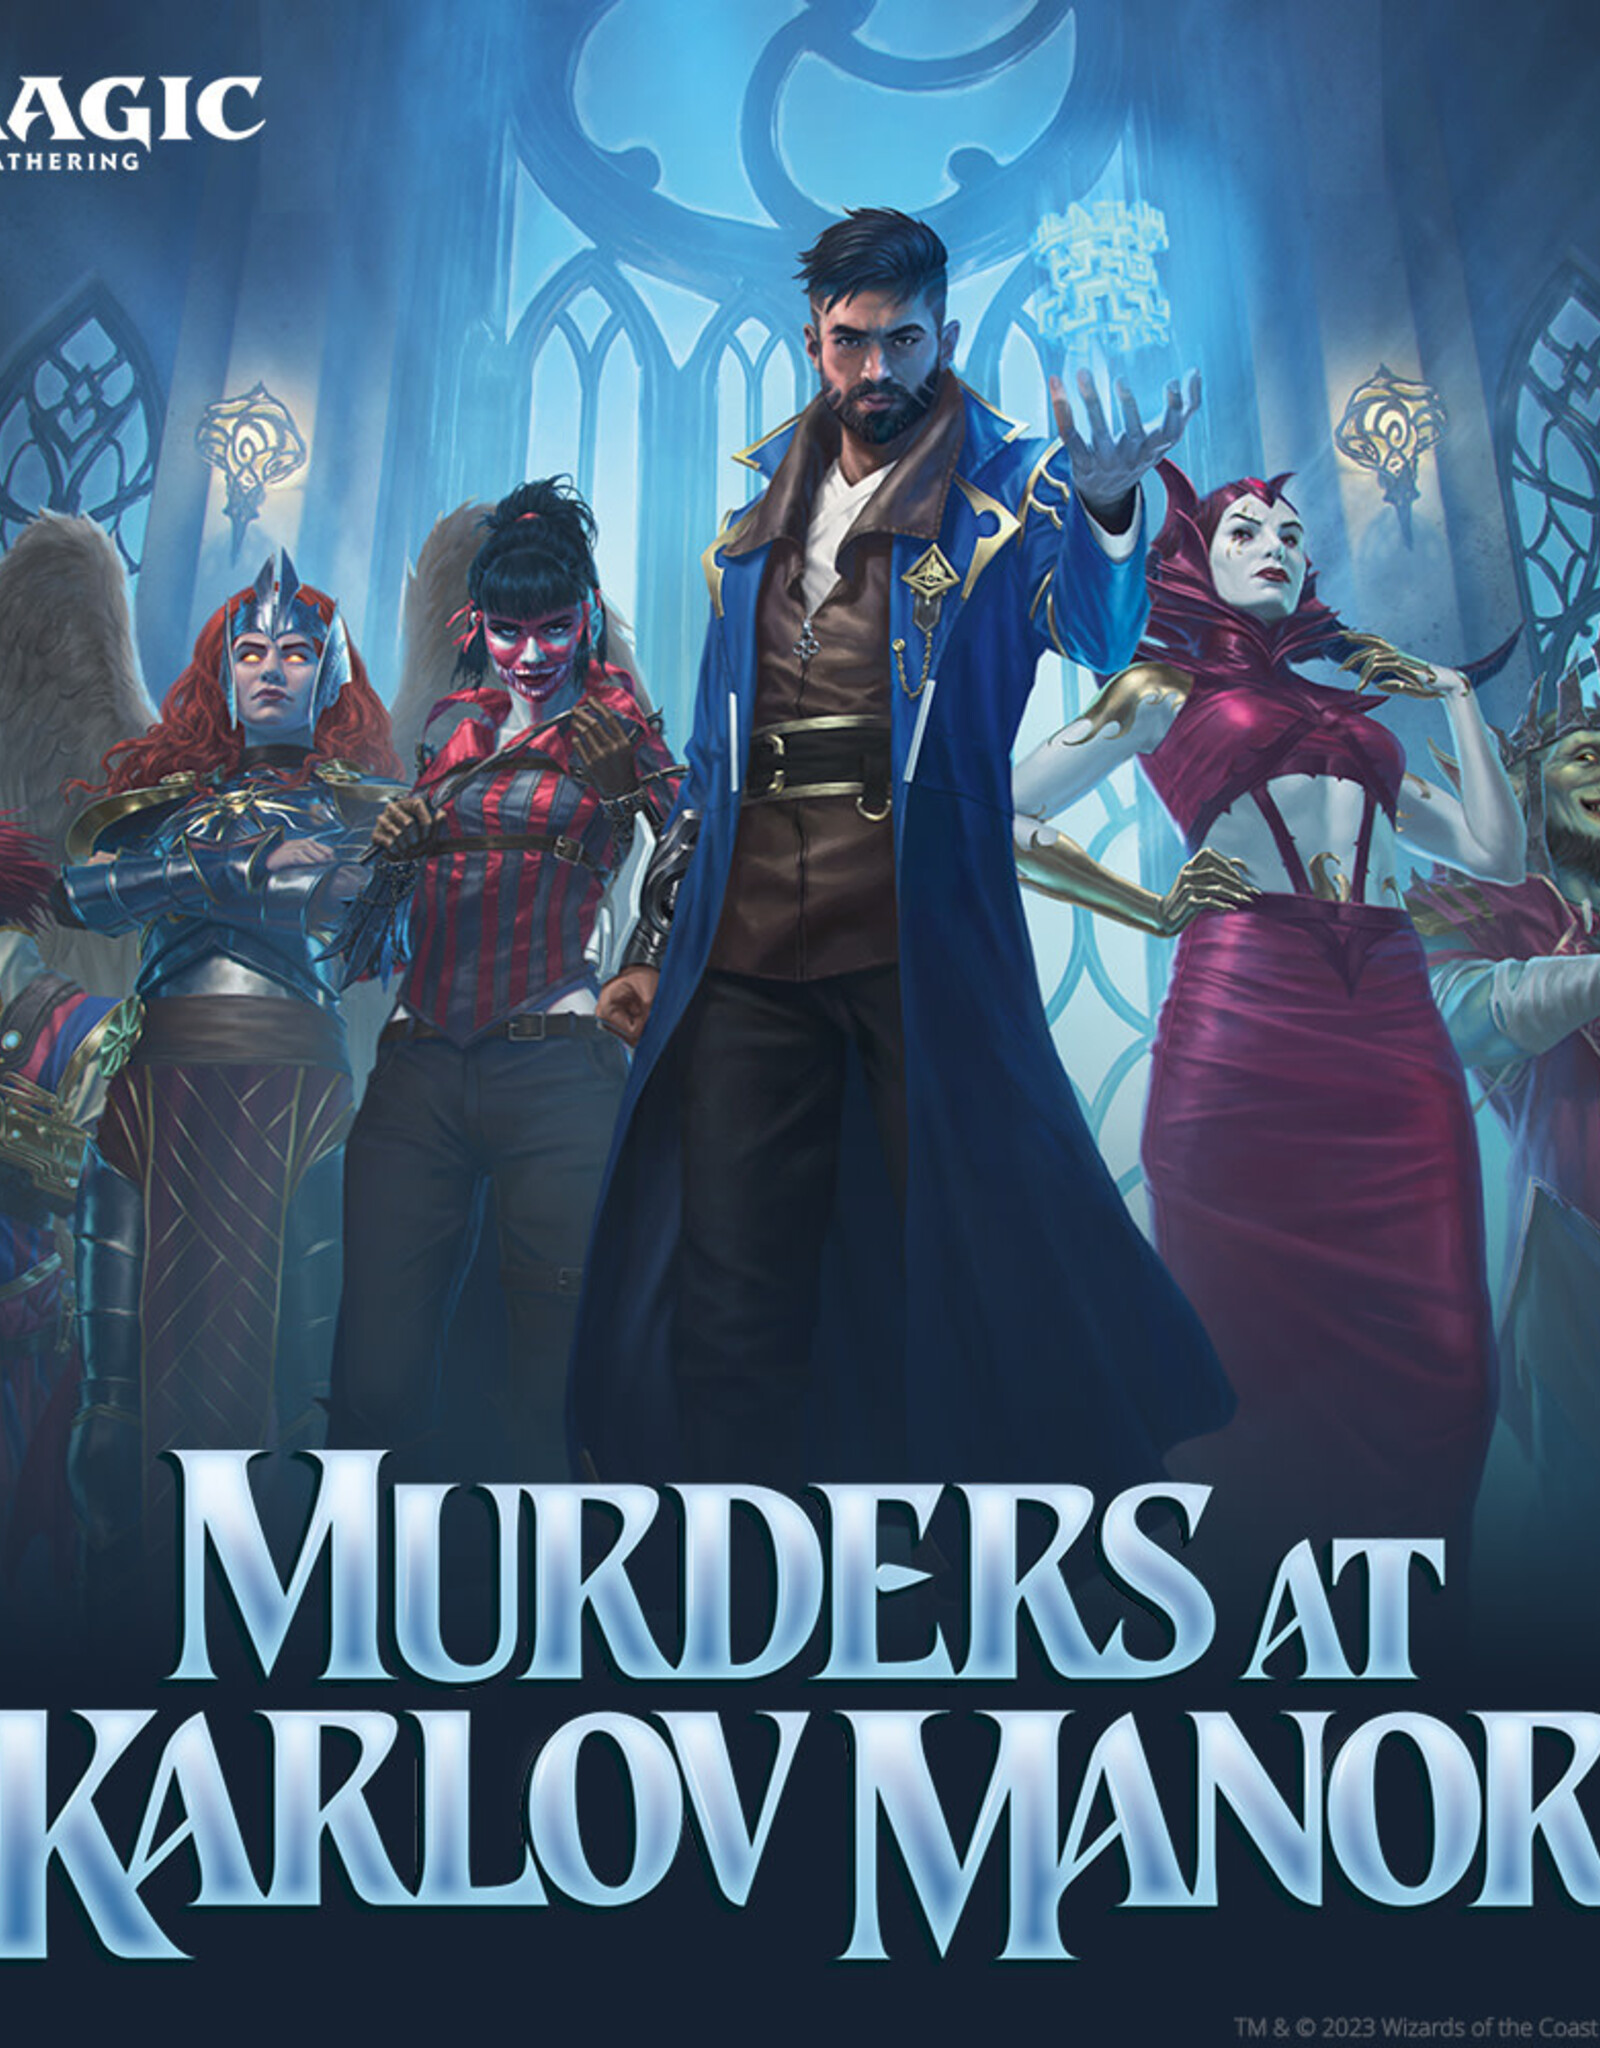 Magic: the Gathering MtG: Murders at Karlov Manor Prerelease Event @Discs & Dice Friday 2/2 @ 430pm